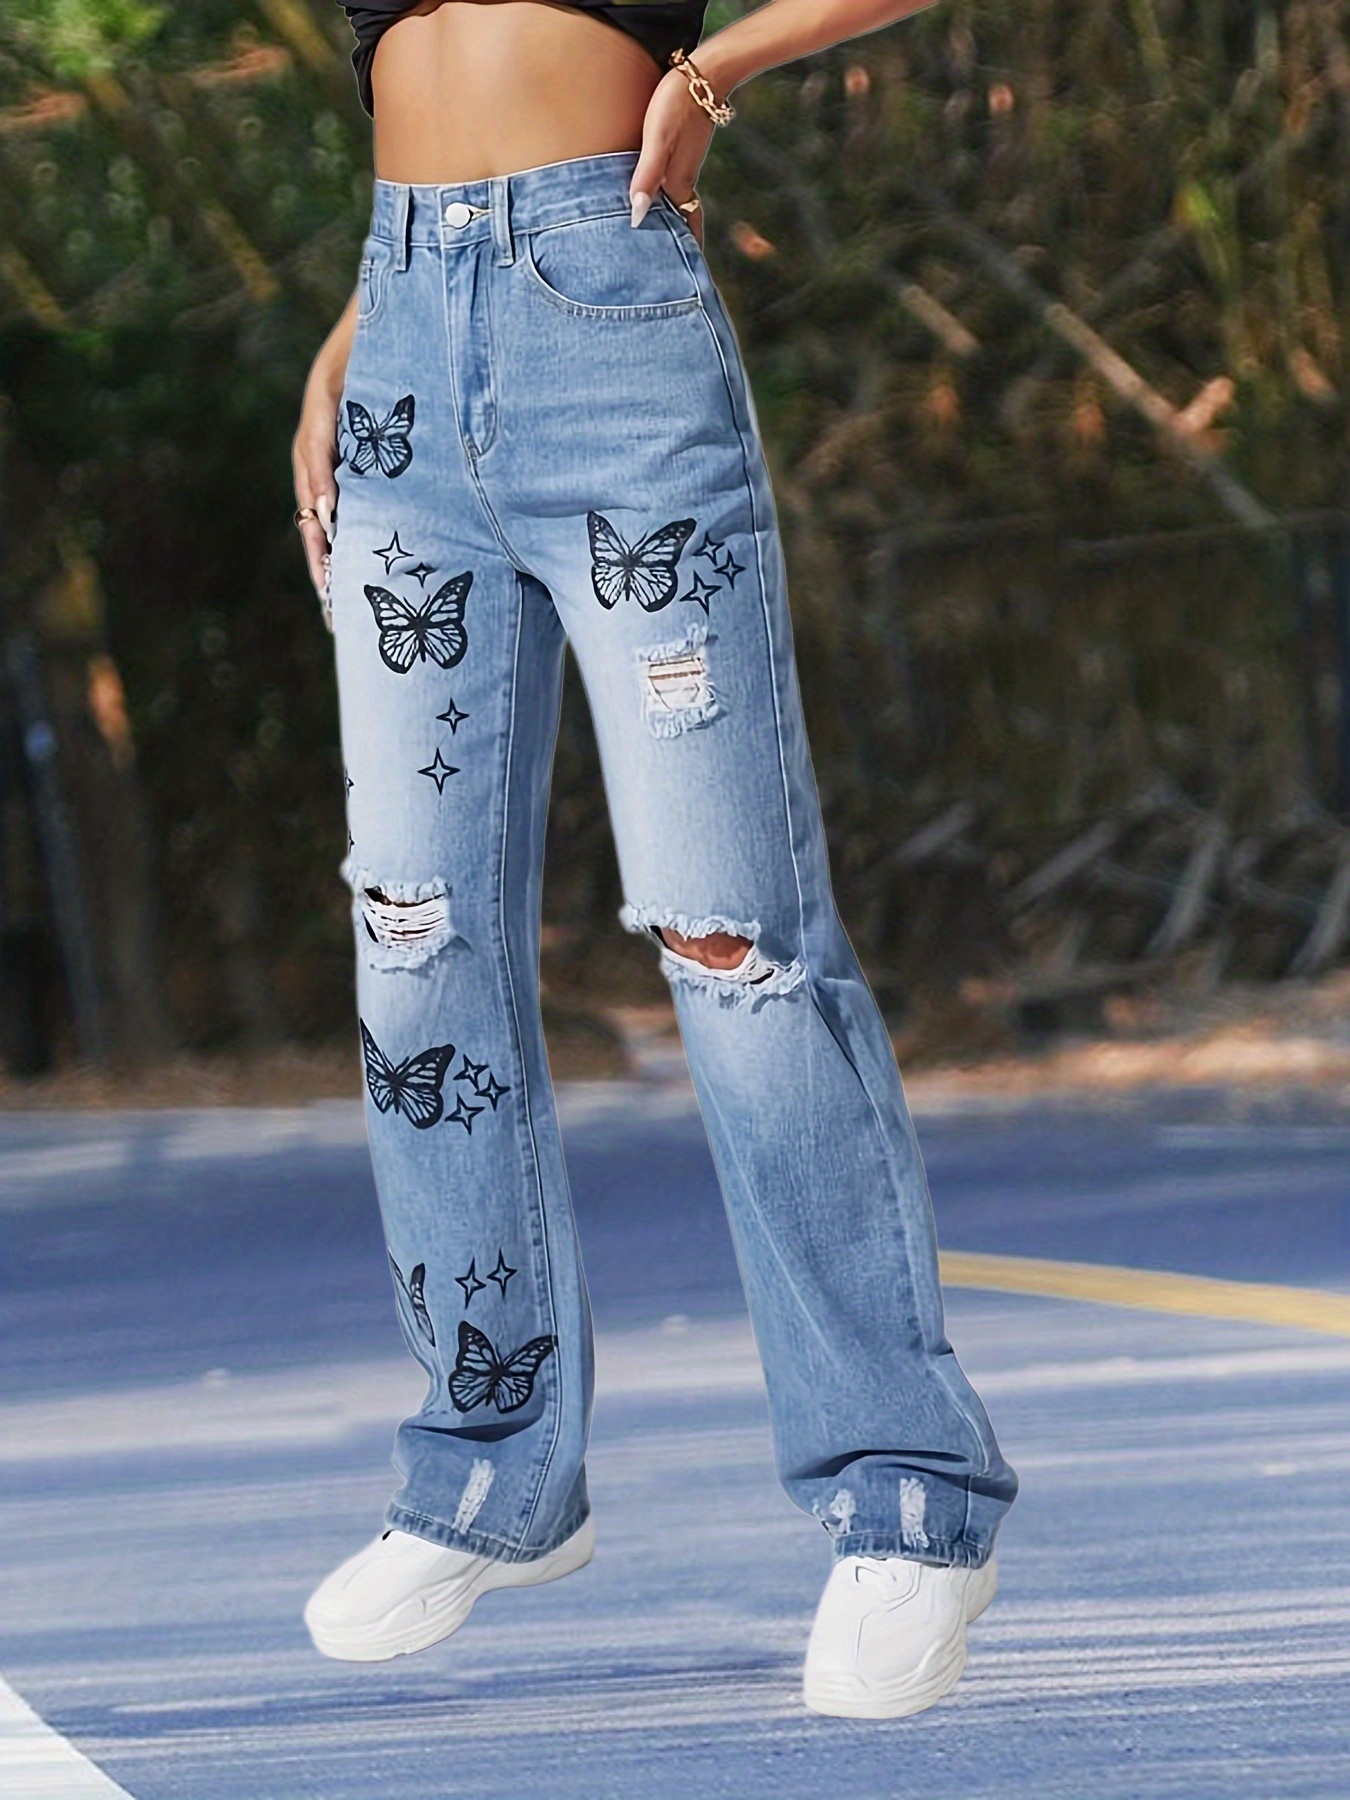 Loose Butterfly Printed Jeans for Women Casual Straight Pants High Waist  Denim Trousers Jeans,L